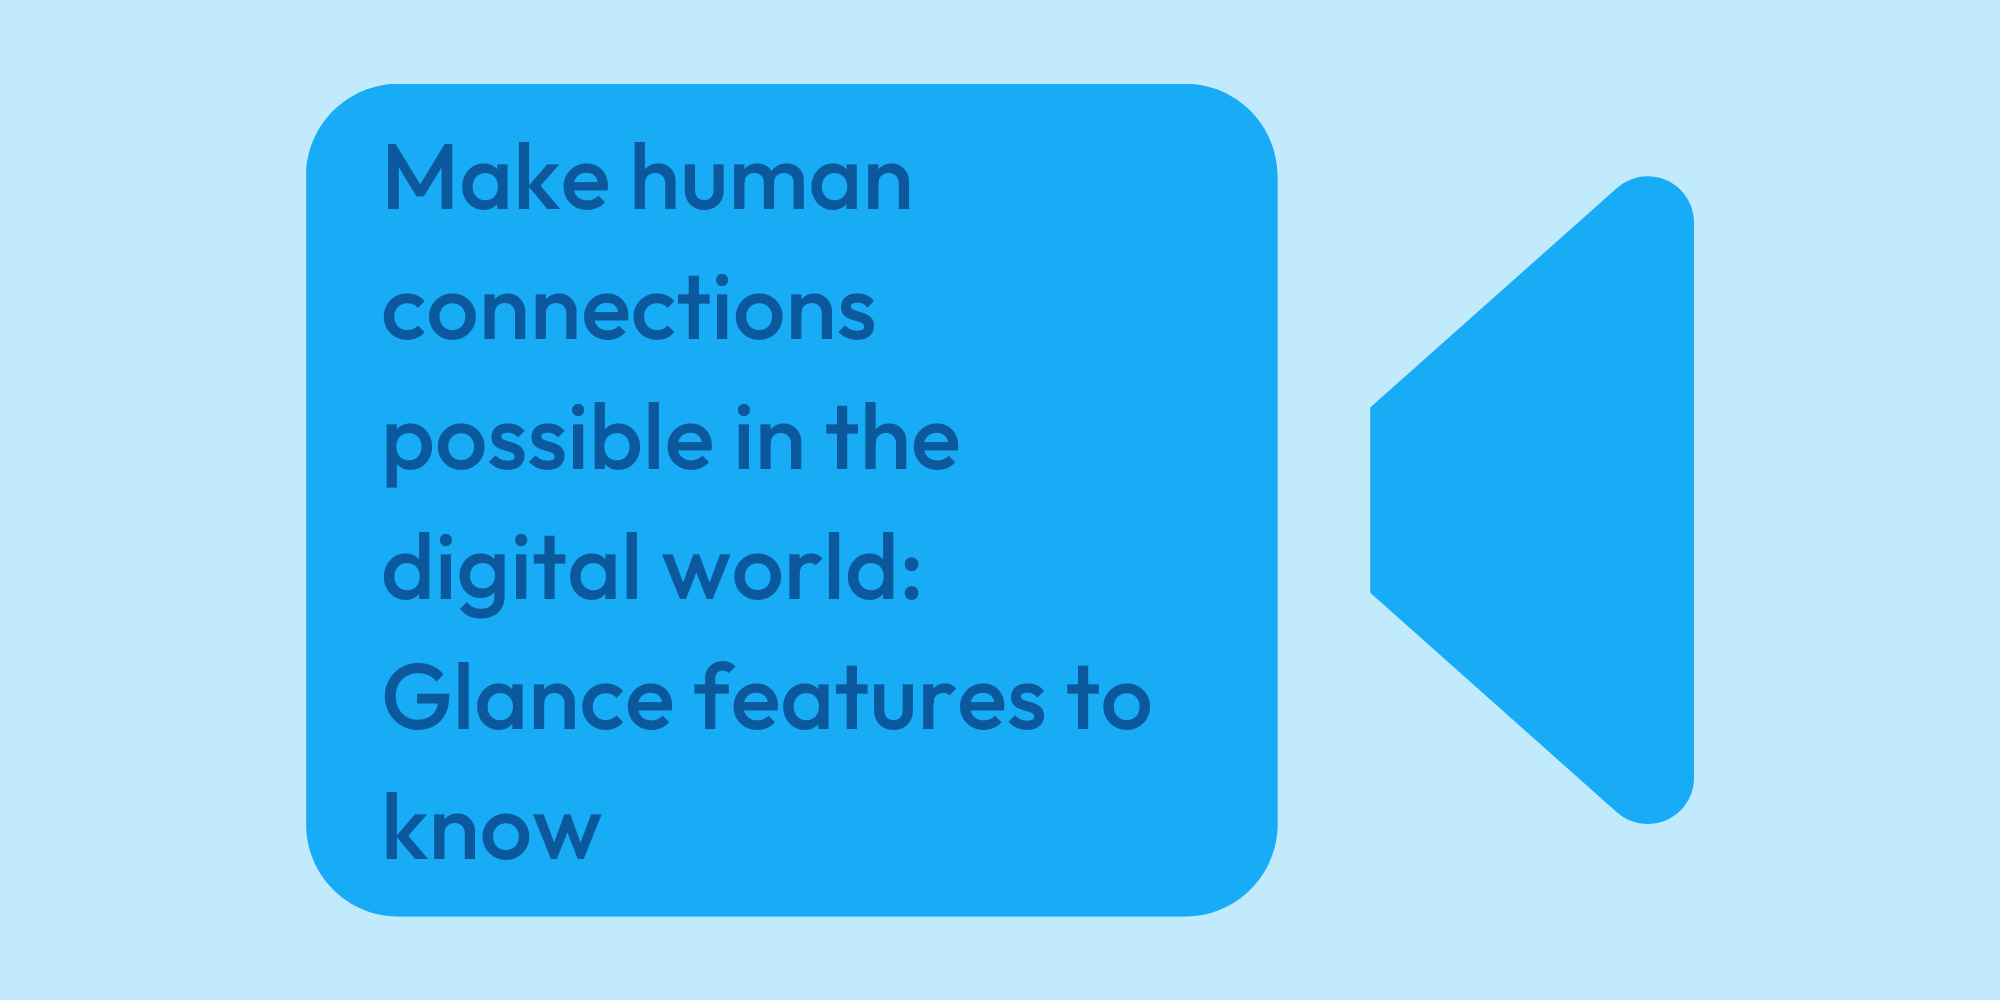 Make human connections possible in the digital world Glance features to know